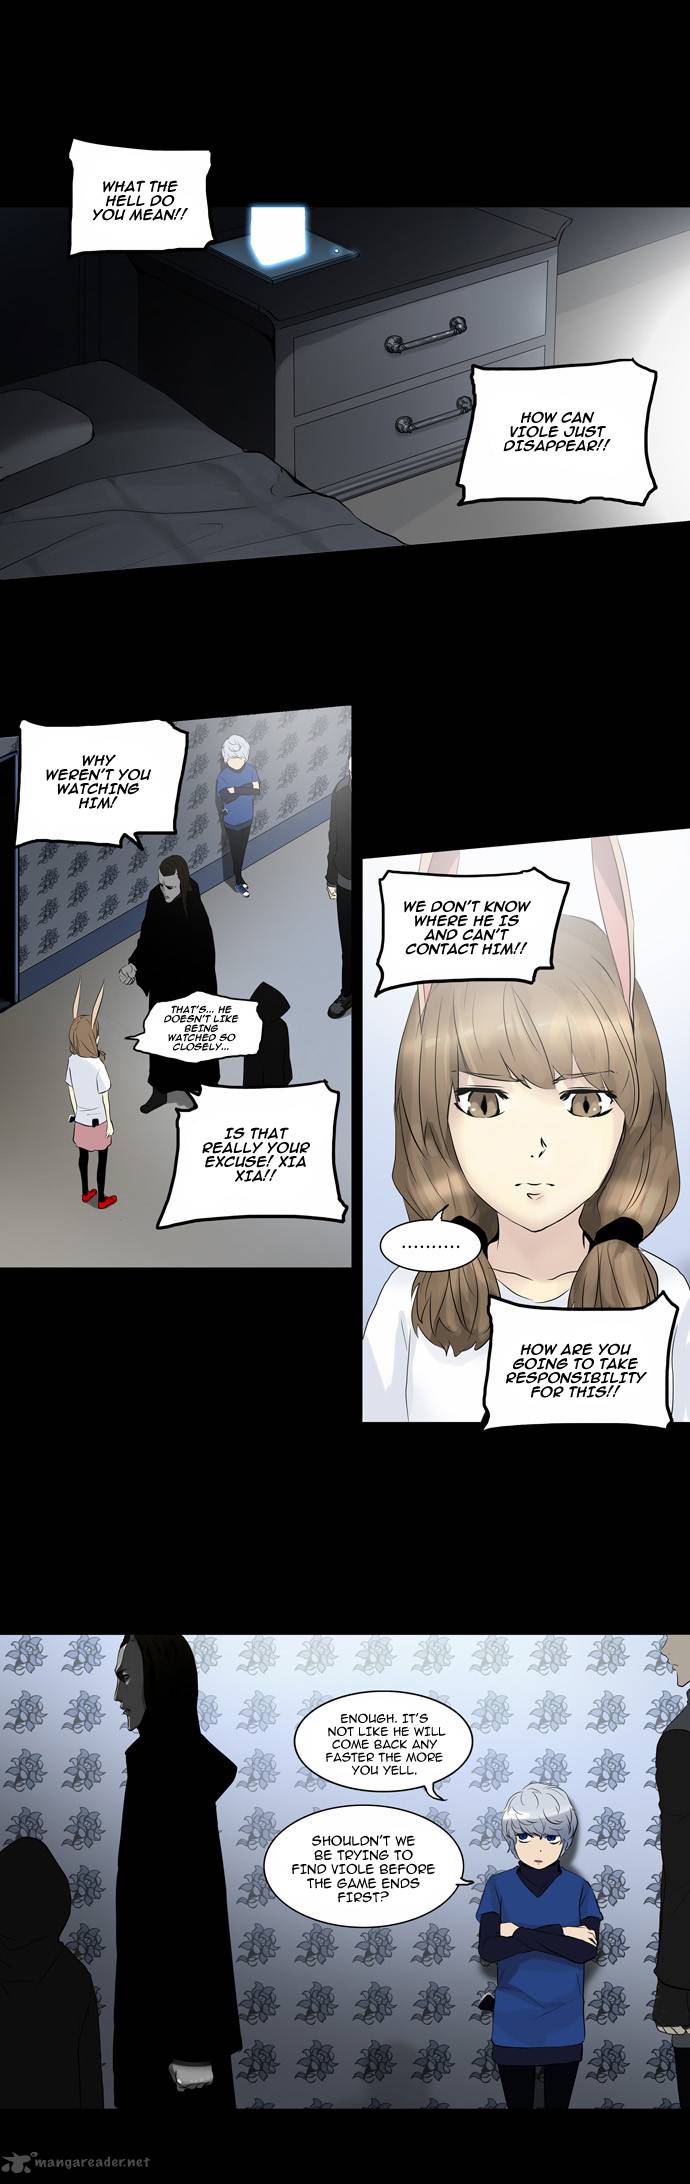 Tower Of God 138 27